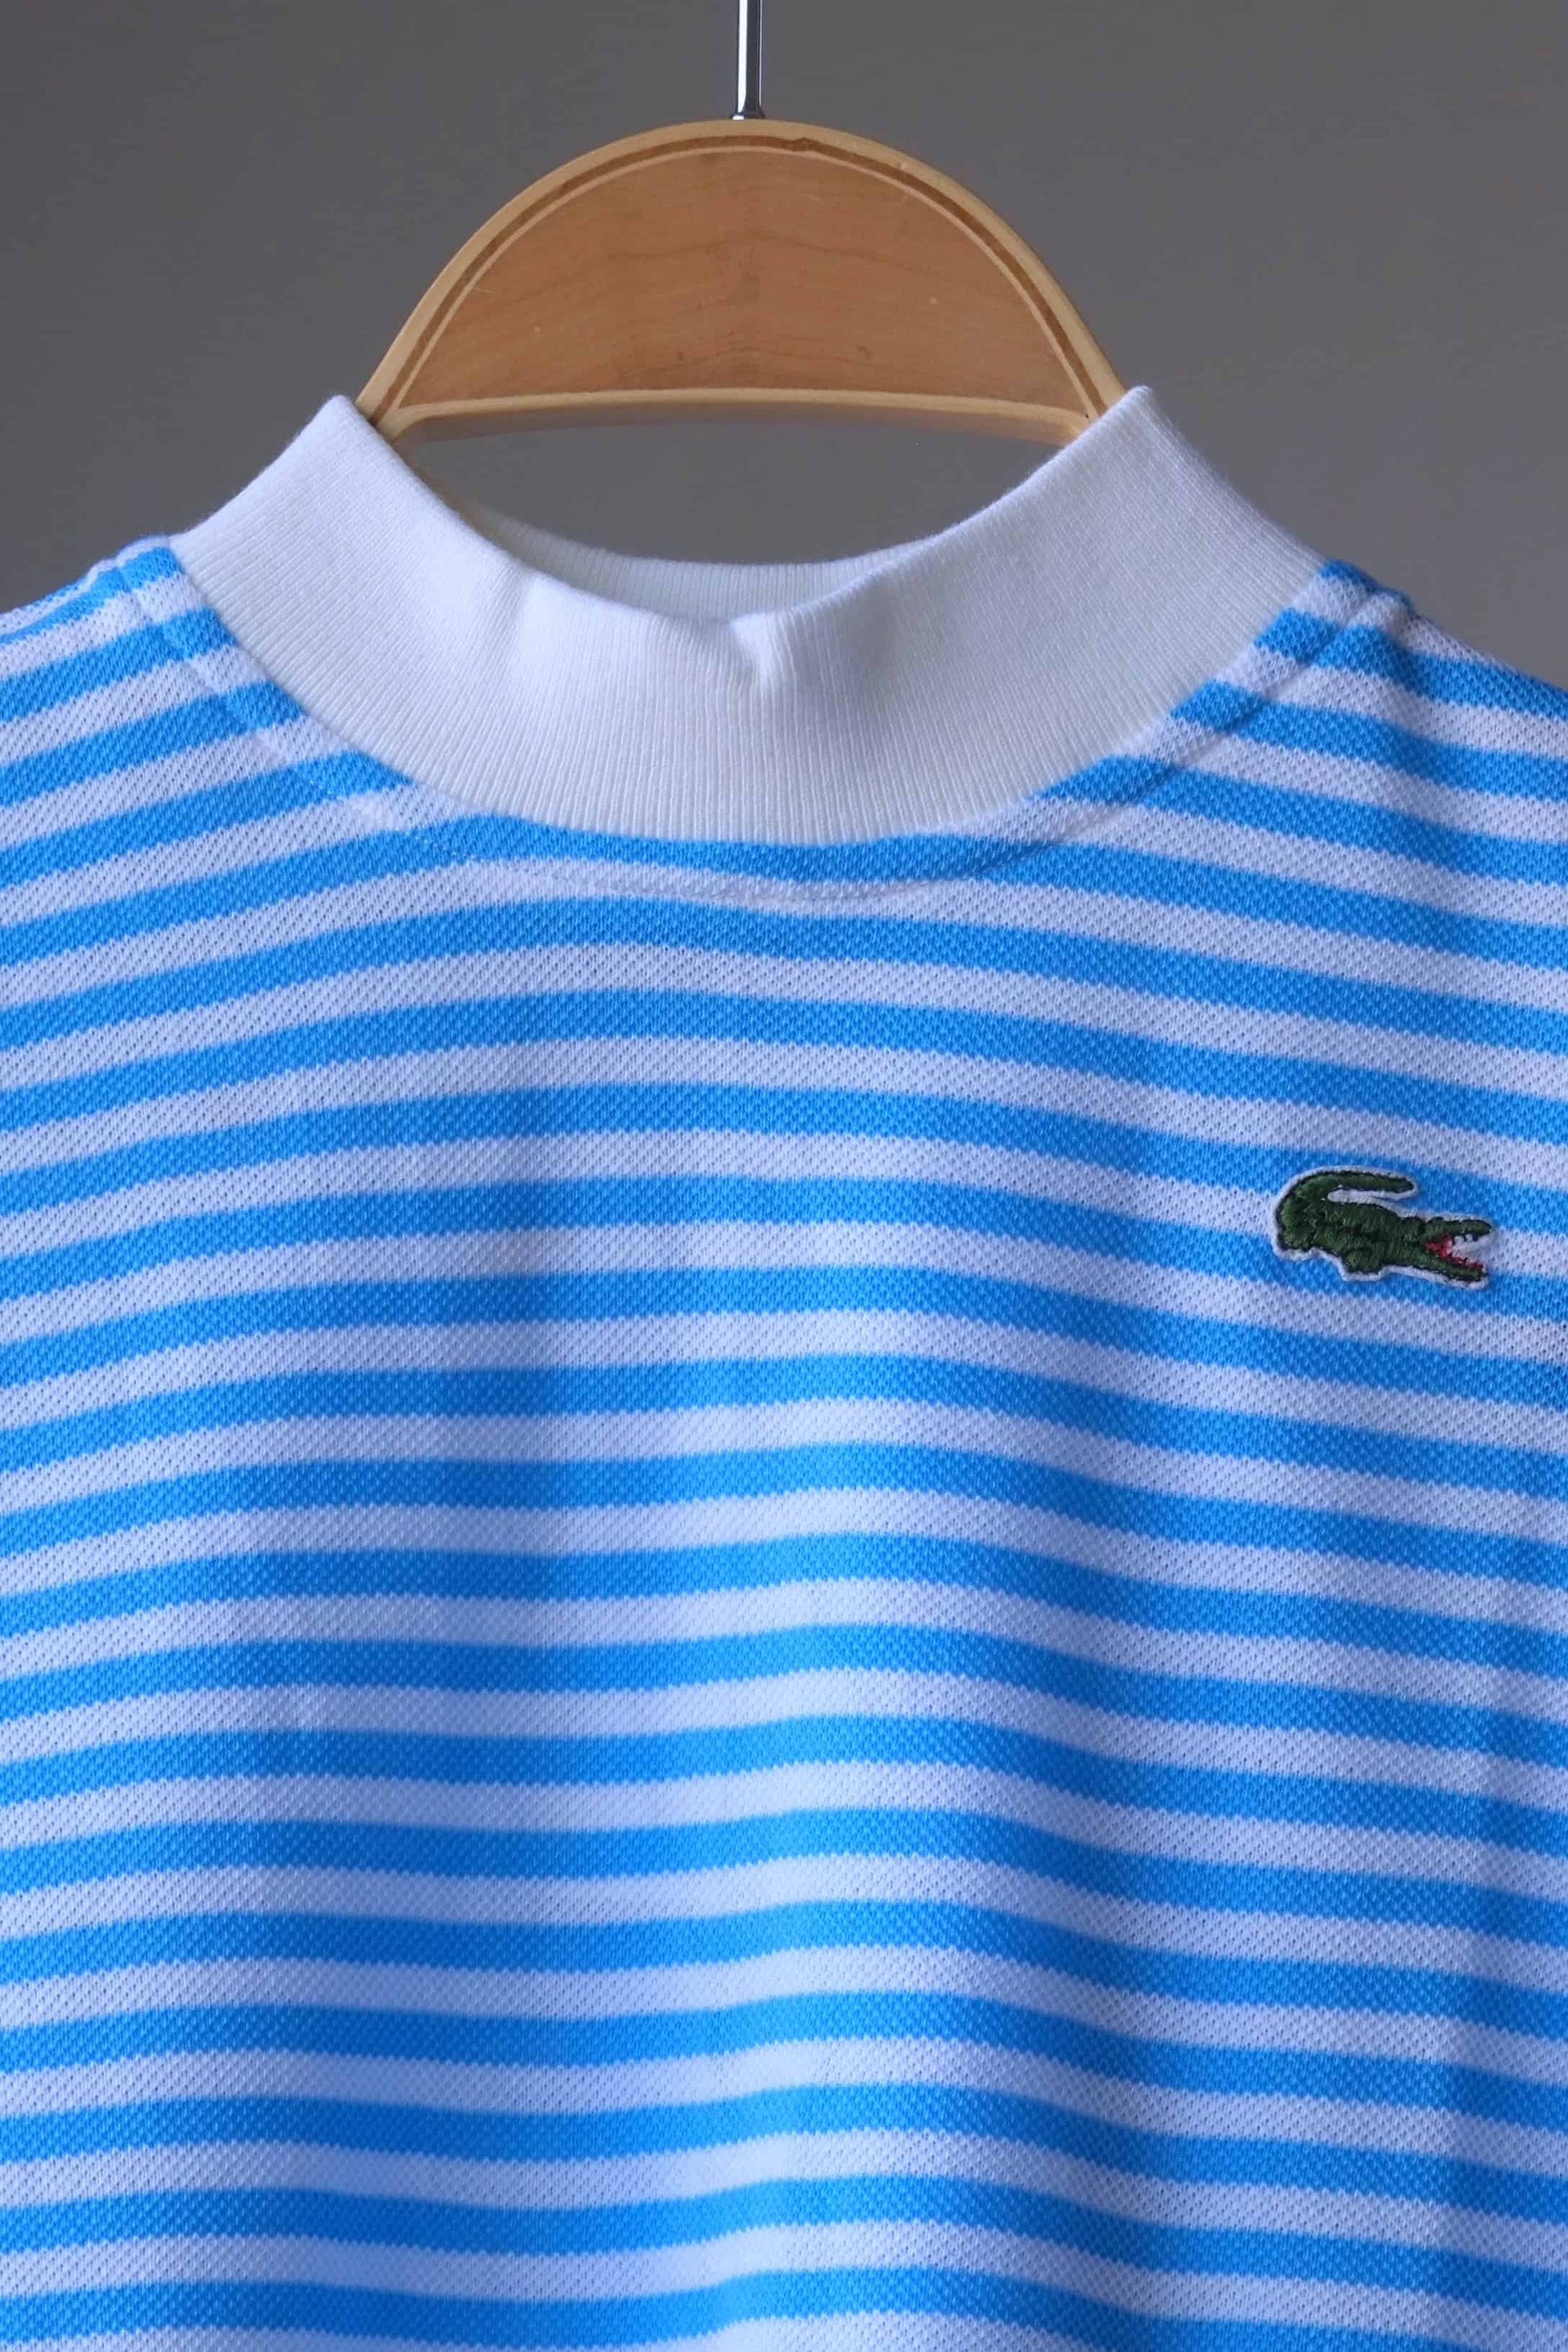 close up of LACOSTE Striped Shirt in blue and white